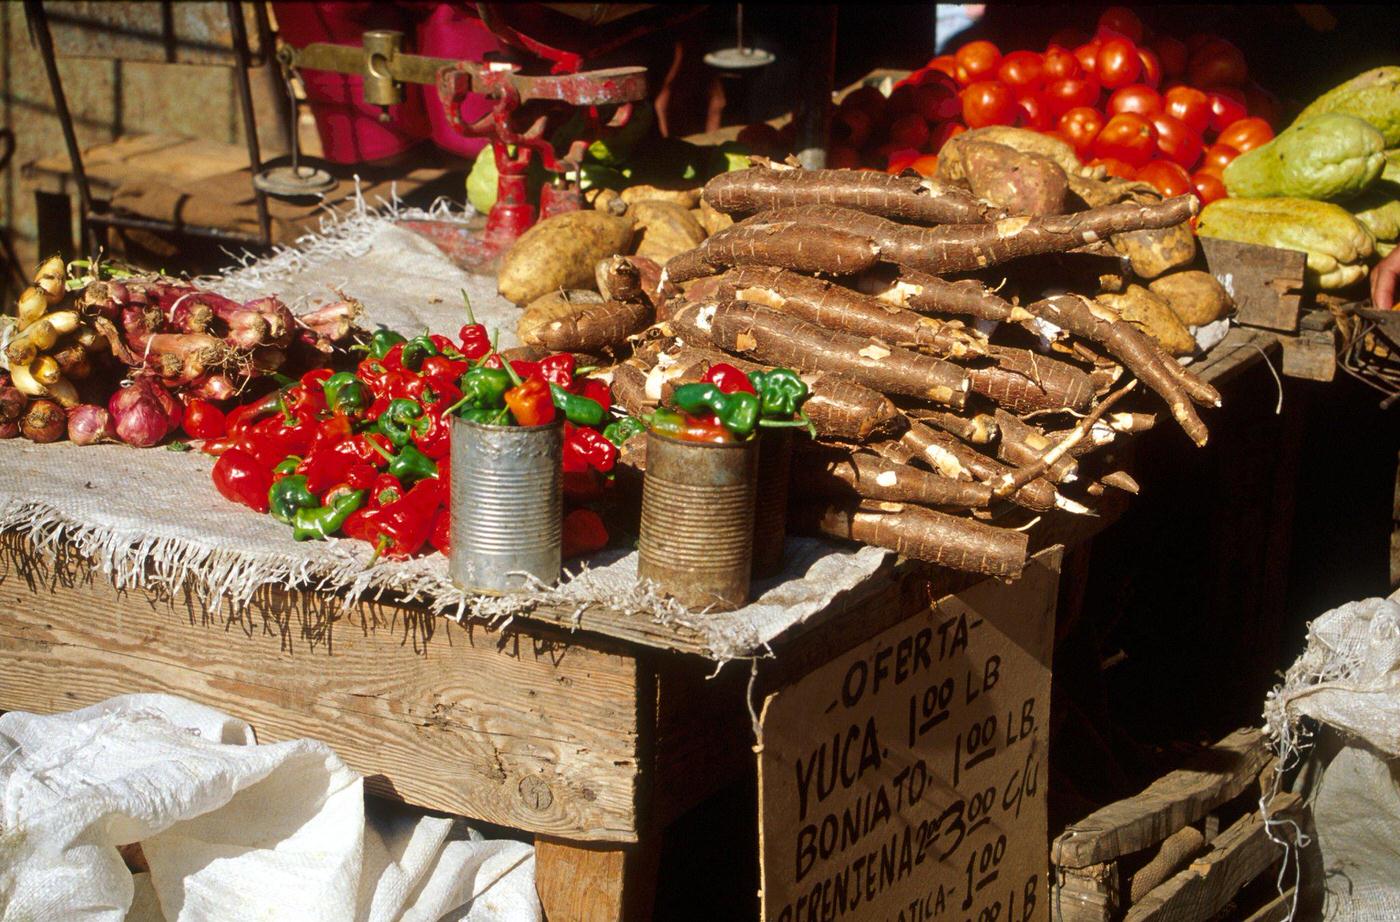 Food market in Santiago de Cuba selling yucca, sweet potatoes, chilies, and vegetables, 1990s.